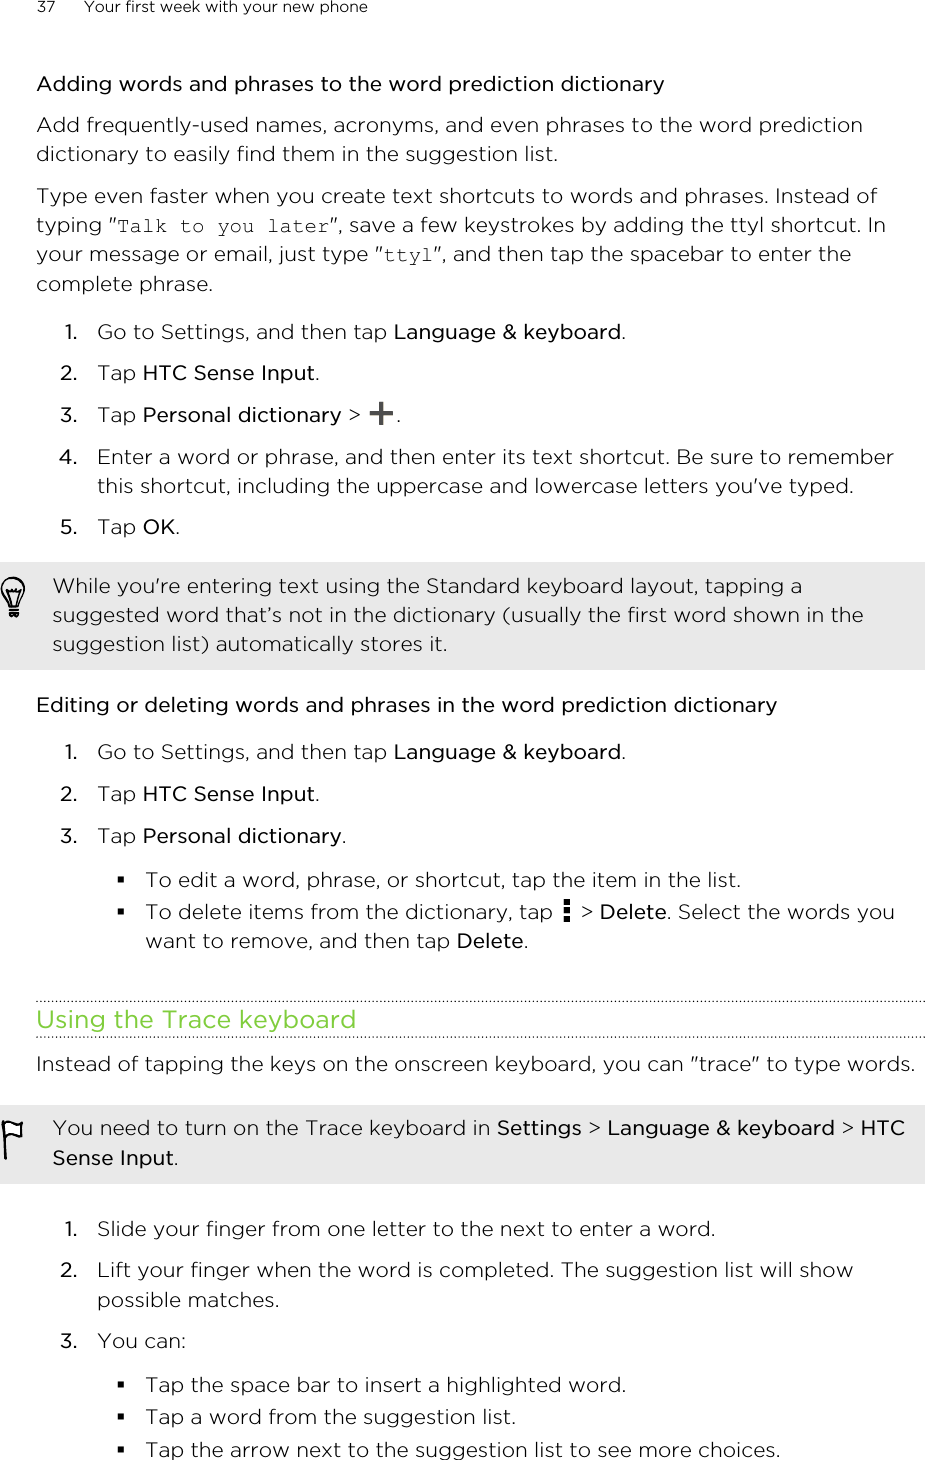 Adding words and phrases to the word prediction dictionaryAdd frequently-used names, acronyms, and even phrases to the word predictiondictionary to easily find them in the suggestion list.Type even faster when you create text shortcuts to words and phrases. Instead oftyping &quot;Talk to you later&quot;, save a few keystrokes by adding the ttyl shortcut. Inyour message or email, just type &quot;ttyl&quot;, and then tap the spacebar to enter thecomplete phrase.1. Go to Settings, and then tap Language &amp; keyboard.2. Tap HTC Sense Input.3. Tap Personal dictionary &gt;  .4. Enter a word or phrase, and then enter its text shortcut. Be sure to rememberthis shortcut, including the uppercase and lowercase letters you&apos;ve typed.5. Tap OK.While you&apos;re entering text using the Standard keyboard layout, tapping asuggested word that’s not in the dictionary (usually the first word shown in thesuggestion list) automatically stores it.Editing or deleting words and phrases in the word prediction dictionary1. Go to Settings, and then tap Language &amp; keyboard.2. Tap HTC Sense Input.3. Tap Personal dictionary.§To edit a word, phrase, or shortcut, tap the item in the list.§To delete items from the dictionary, tap   &gt; Delete. Select the words youwant to remove, and then tap Delete.Using the Trace keyboardInstead of tapping the keys on the onscreen keyboard, you can &quot;trace&quot; to type words.You need to turn on the Trace keyboard in Settings &gt; Language &amp; keyboard &gt; HTCSense Input.1. Slide your finger from one letter to the next to enter a word.2. Lift your finger when the word is completed. The suggestion list will showpossible matches.3. You can:§Tap the space bar to insert a highlighted word.§Tap a word from the suggestion list.§Tap the arrow next to the suggestion list to see more choices.37 Your first week with your new phoneHTC Confidential for Certification HTC Confidential for Certification